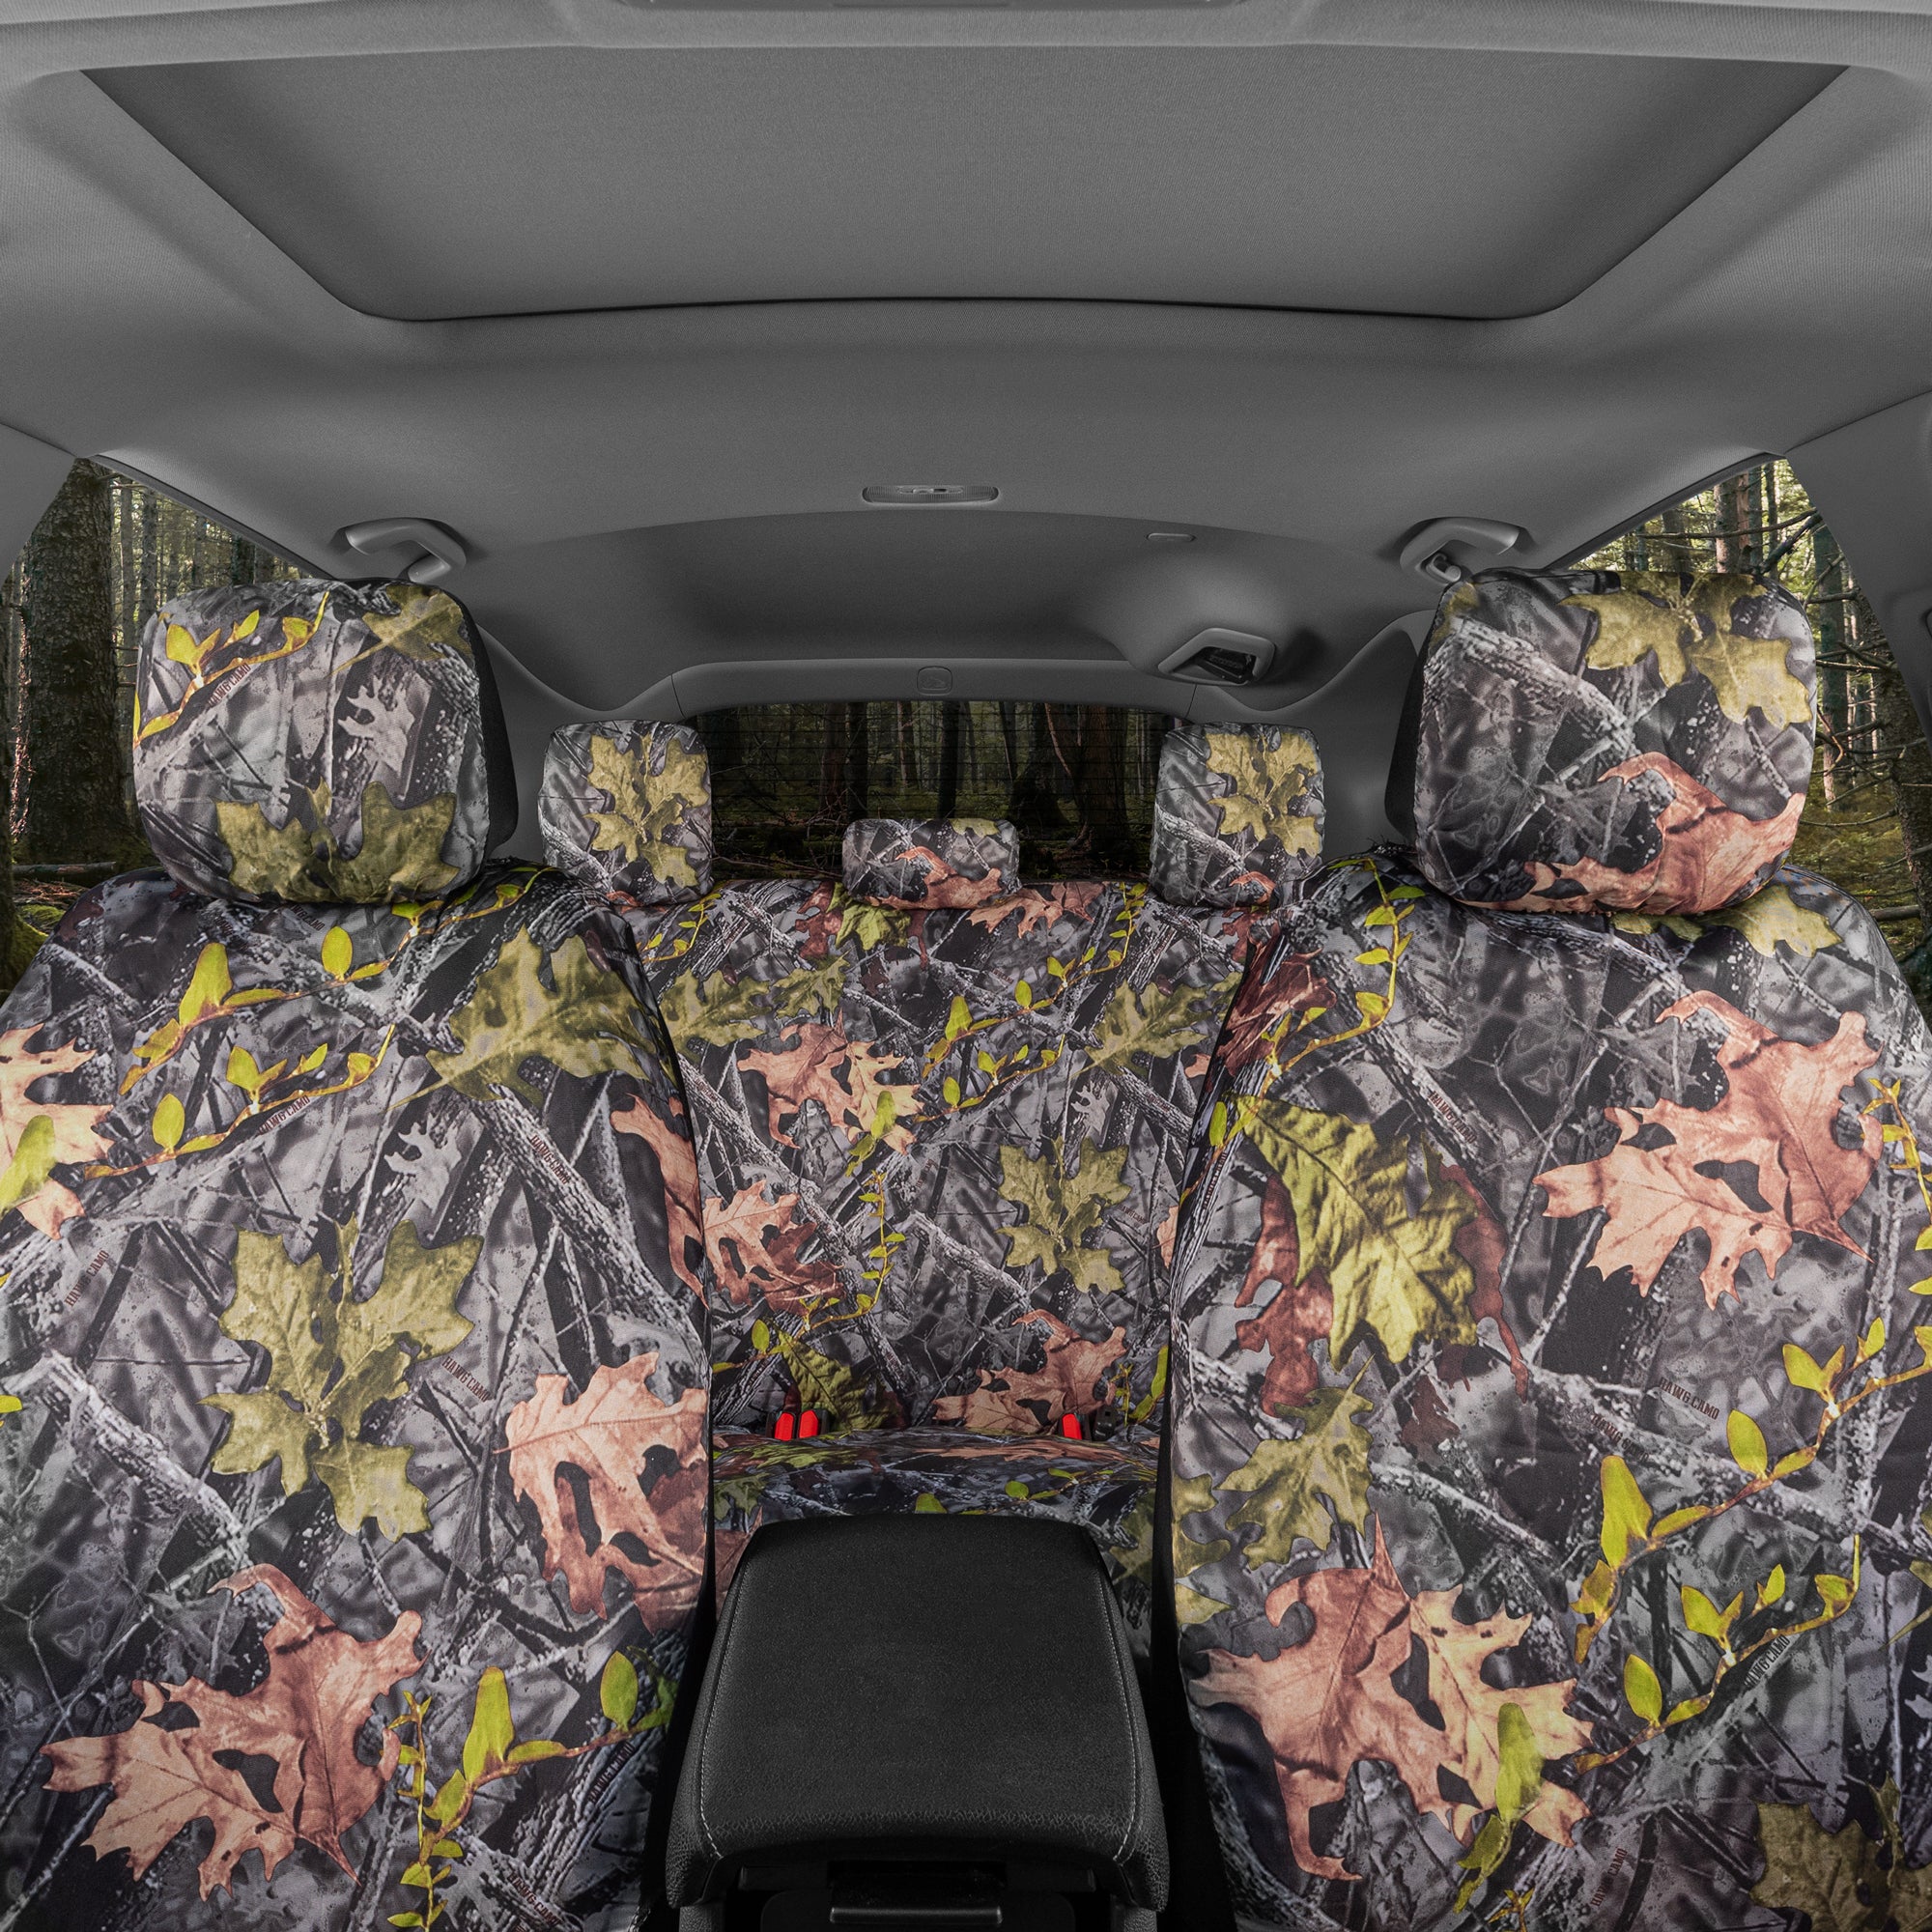 Camo Car Seat Covers Full Set – Realistic Green Forest Camouflage Automotive Front & Bench Back Seat Cover, Camoflauge Interior Protectors for Auto Truck Van & SUV